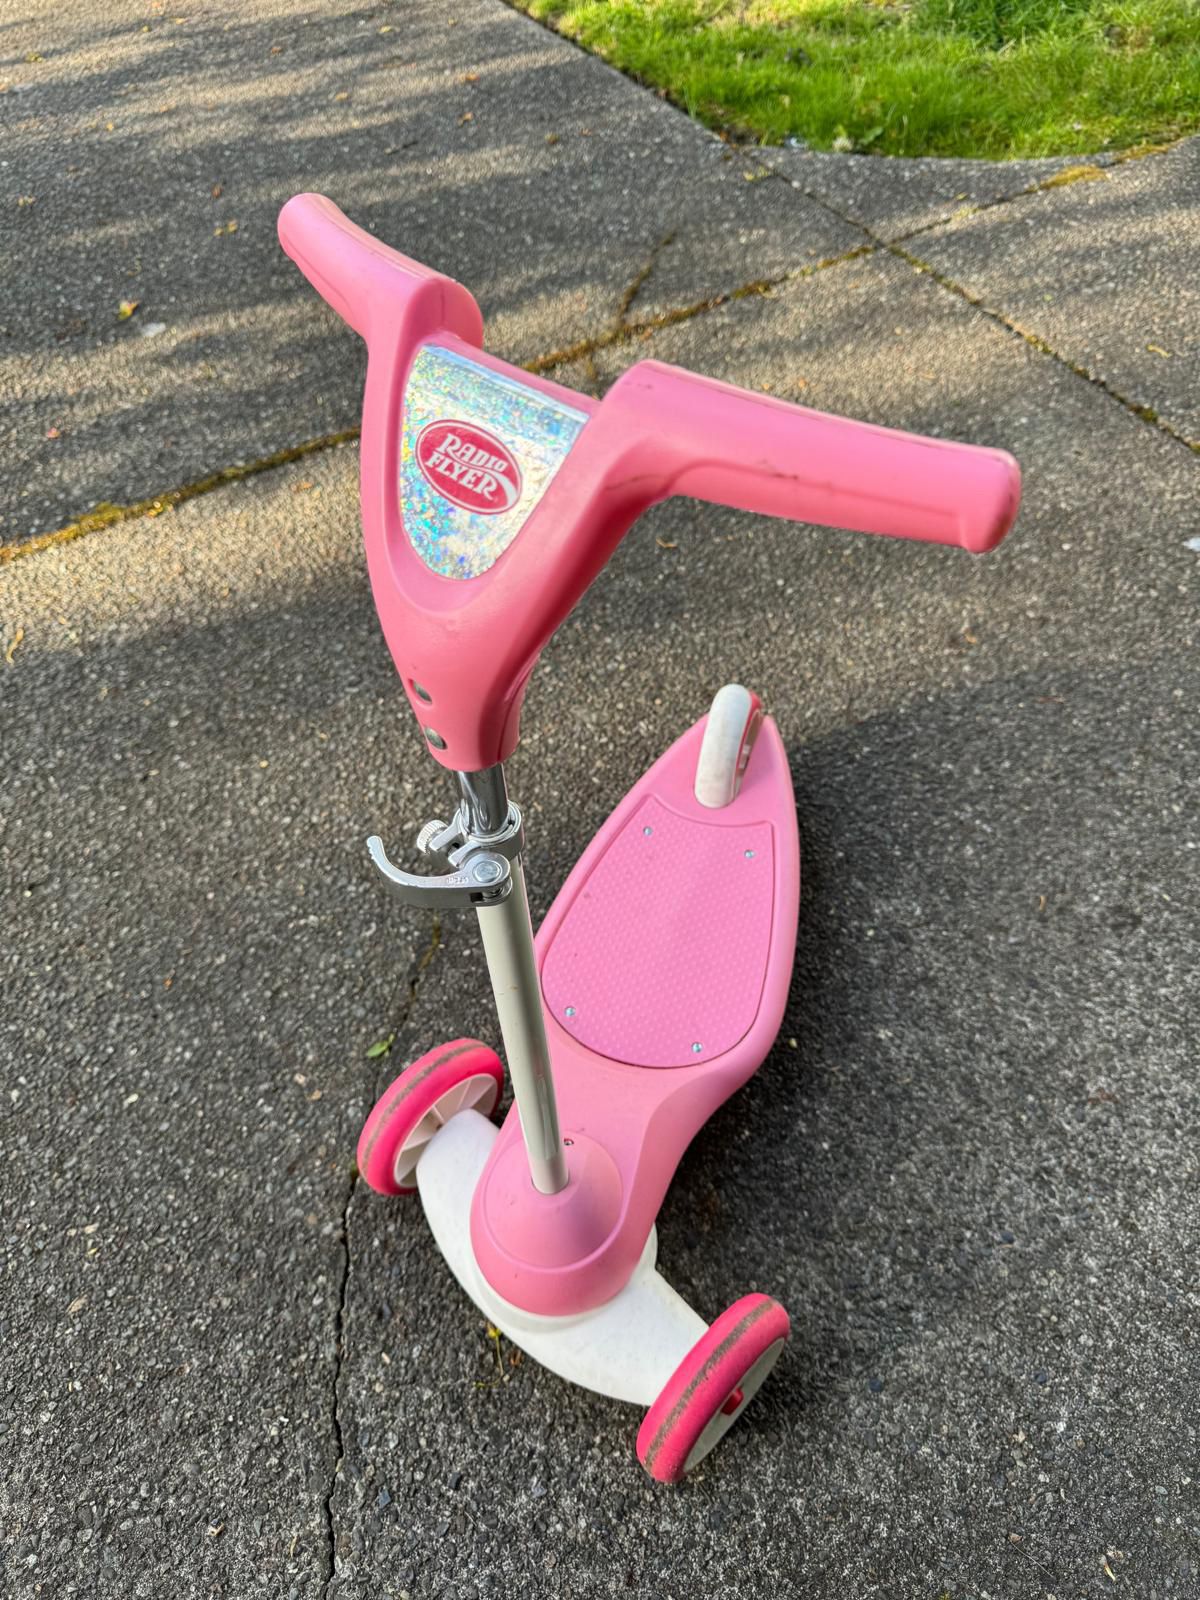 Scooter - Radio Flyer for toddlers